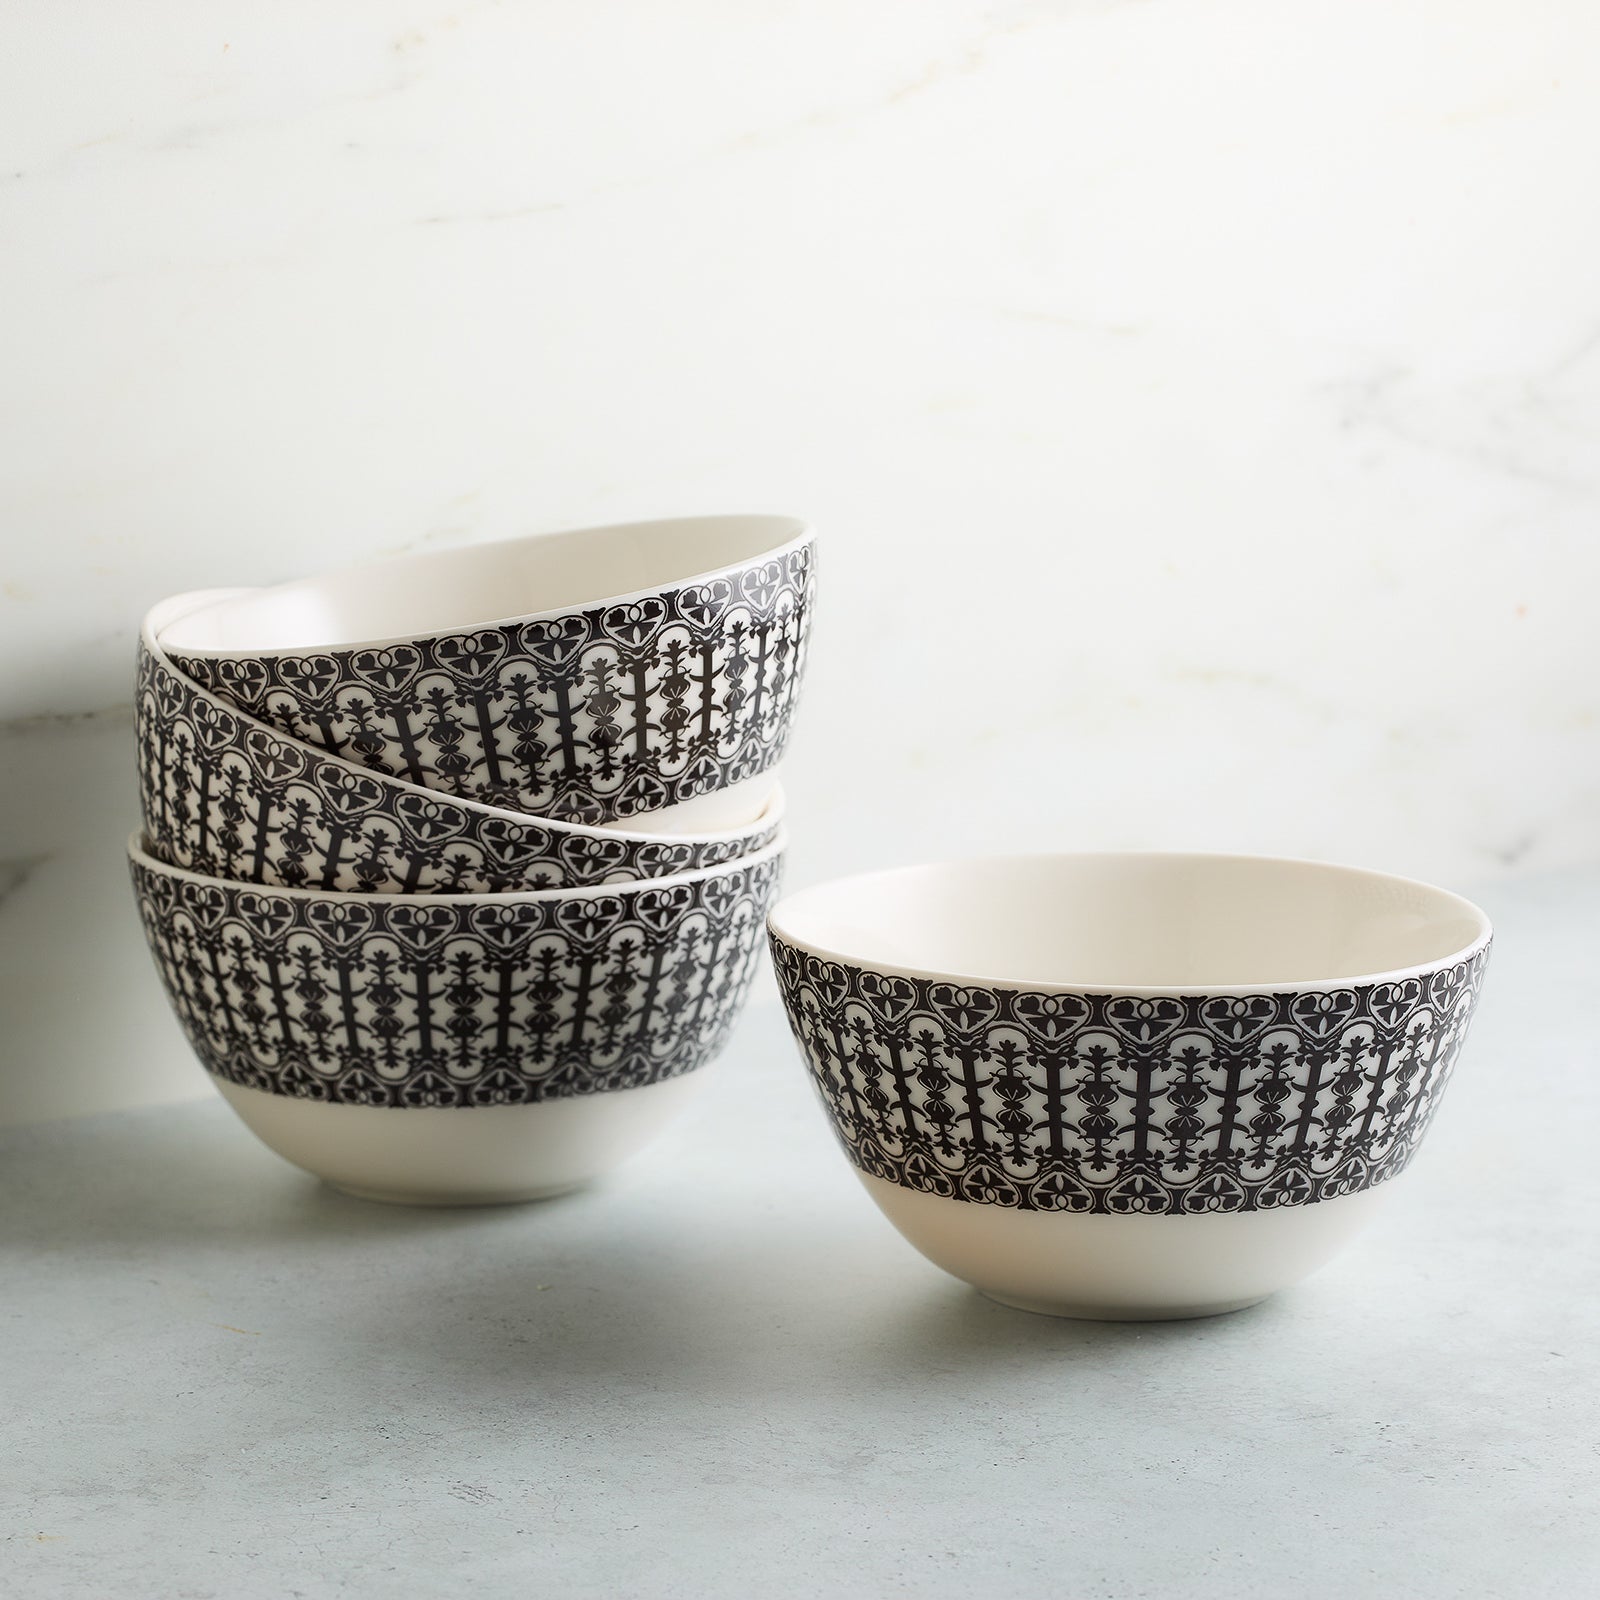 A white ceramic Casablanca Cereal Bowl with intricate black decorative patterns around the exterior, part of the Caskata Artisanal Home dinnerware collection.